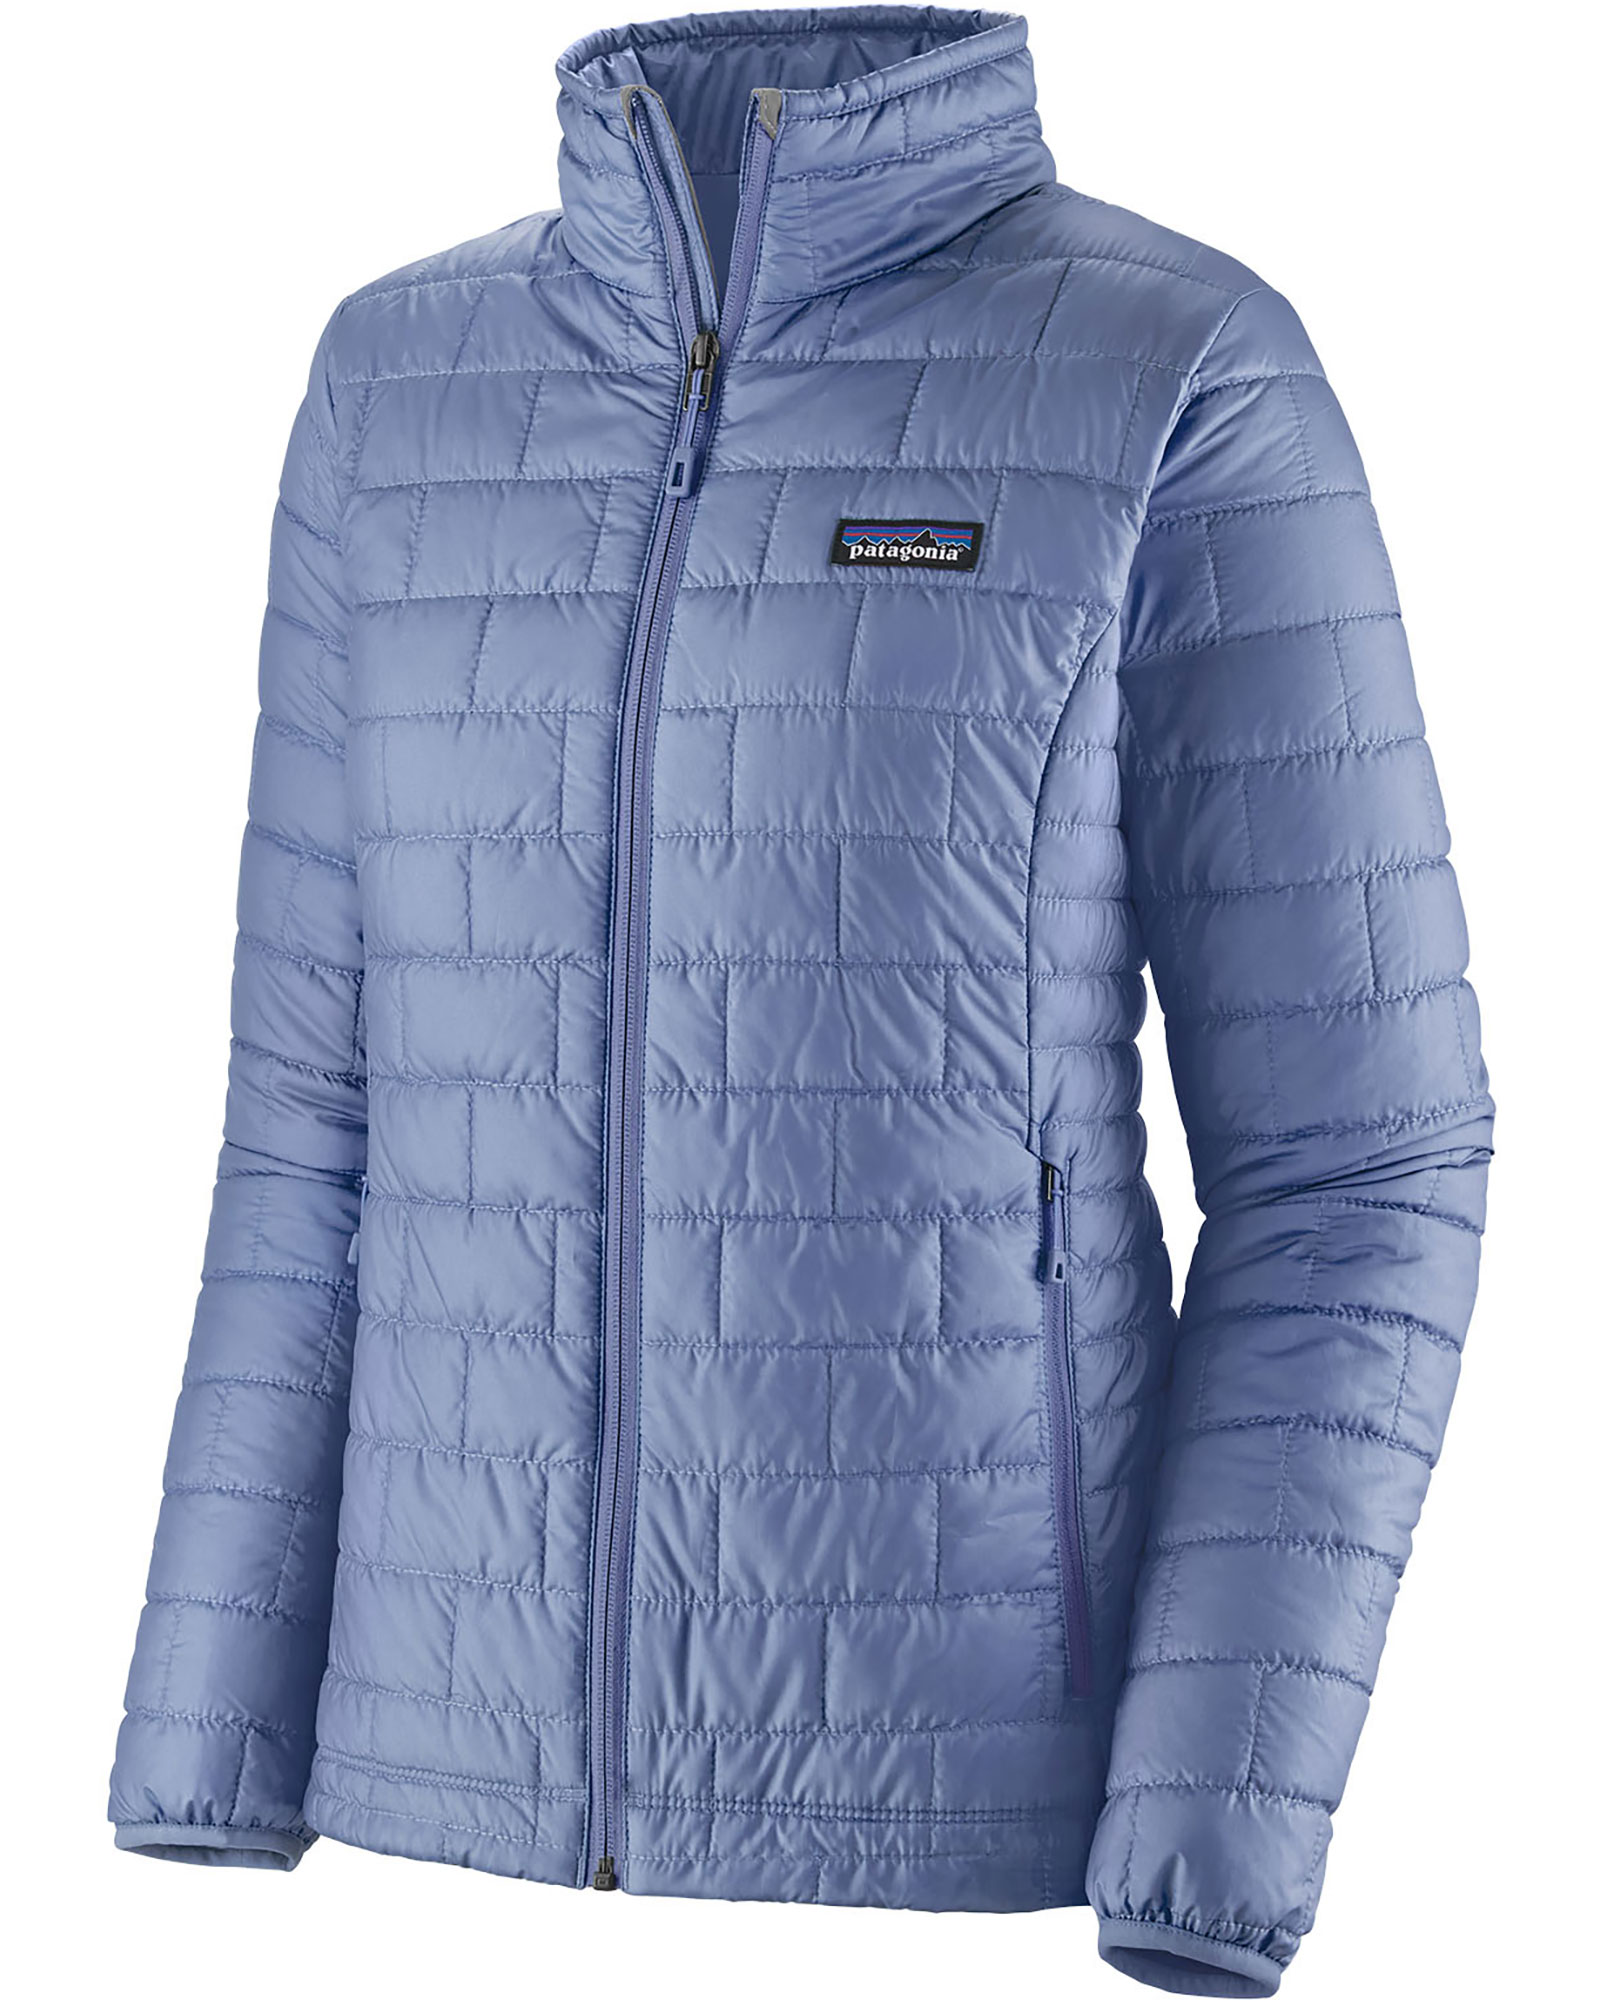 Patagonia Nano Puff Women’s Insulated Jacket - Light Current Blue S